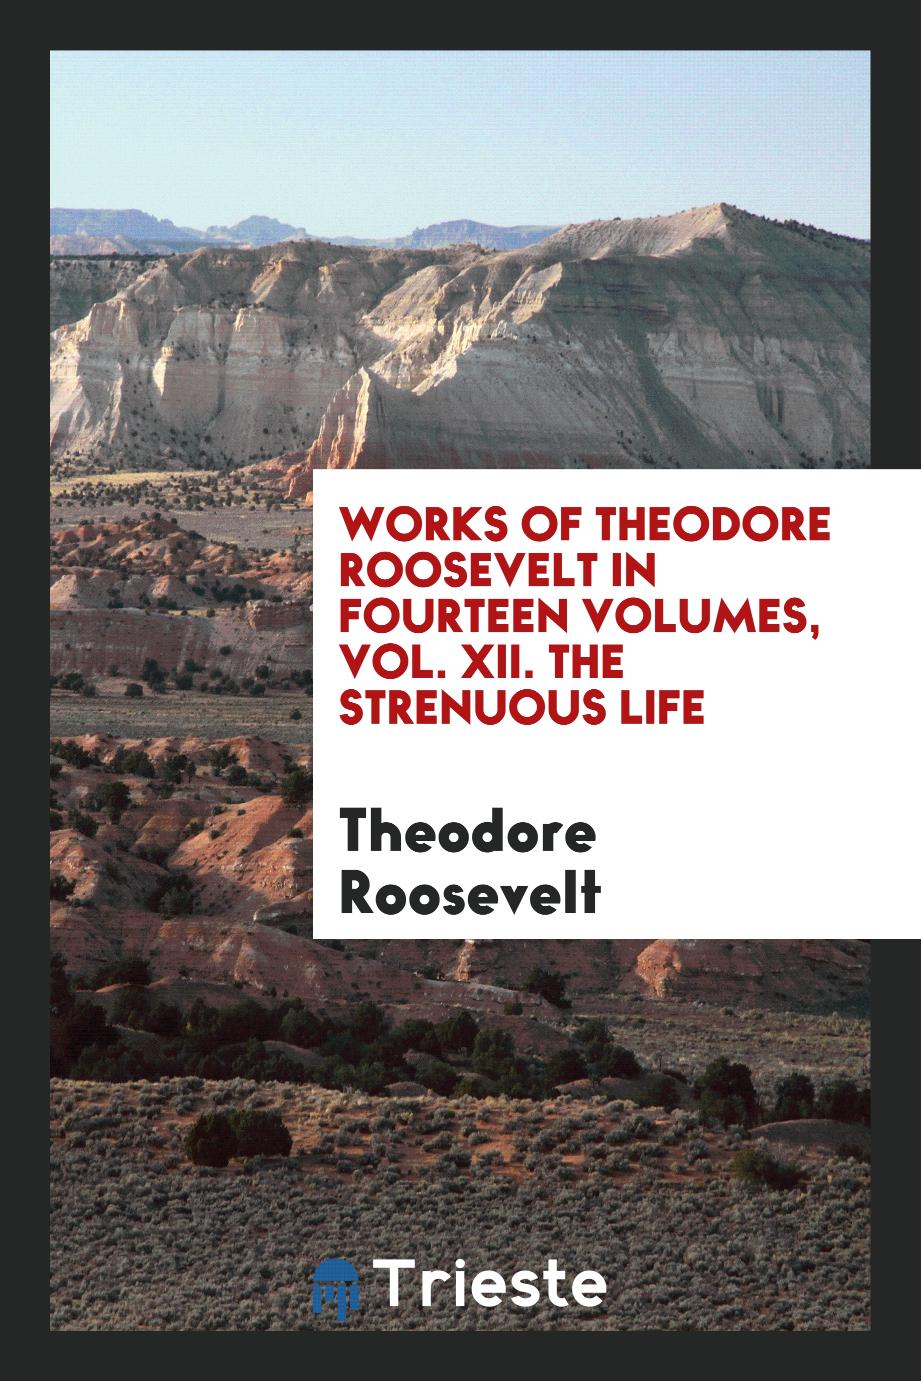 Works of Theodore Roosevelt in Fourteen Volumes, Vol. XII. The Strenuous Life